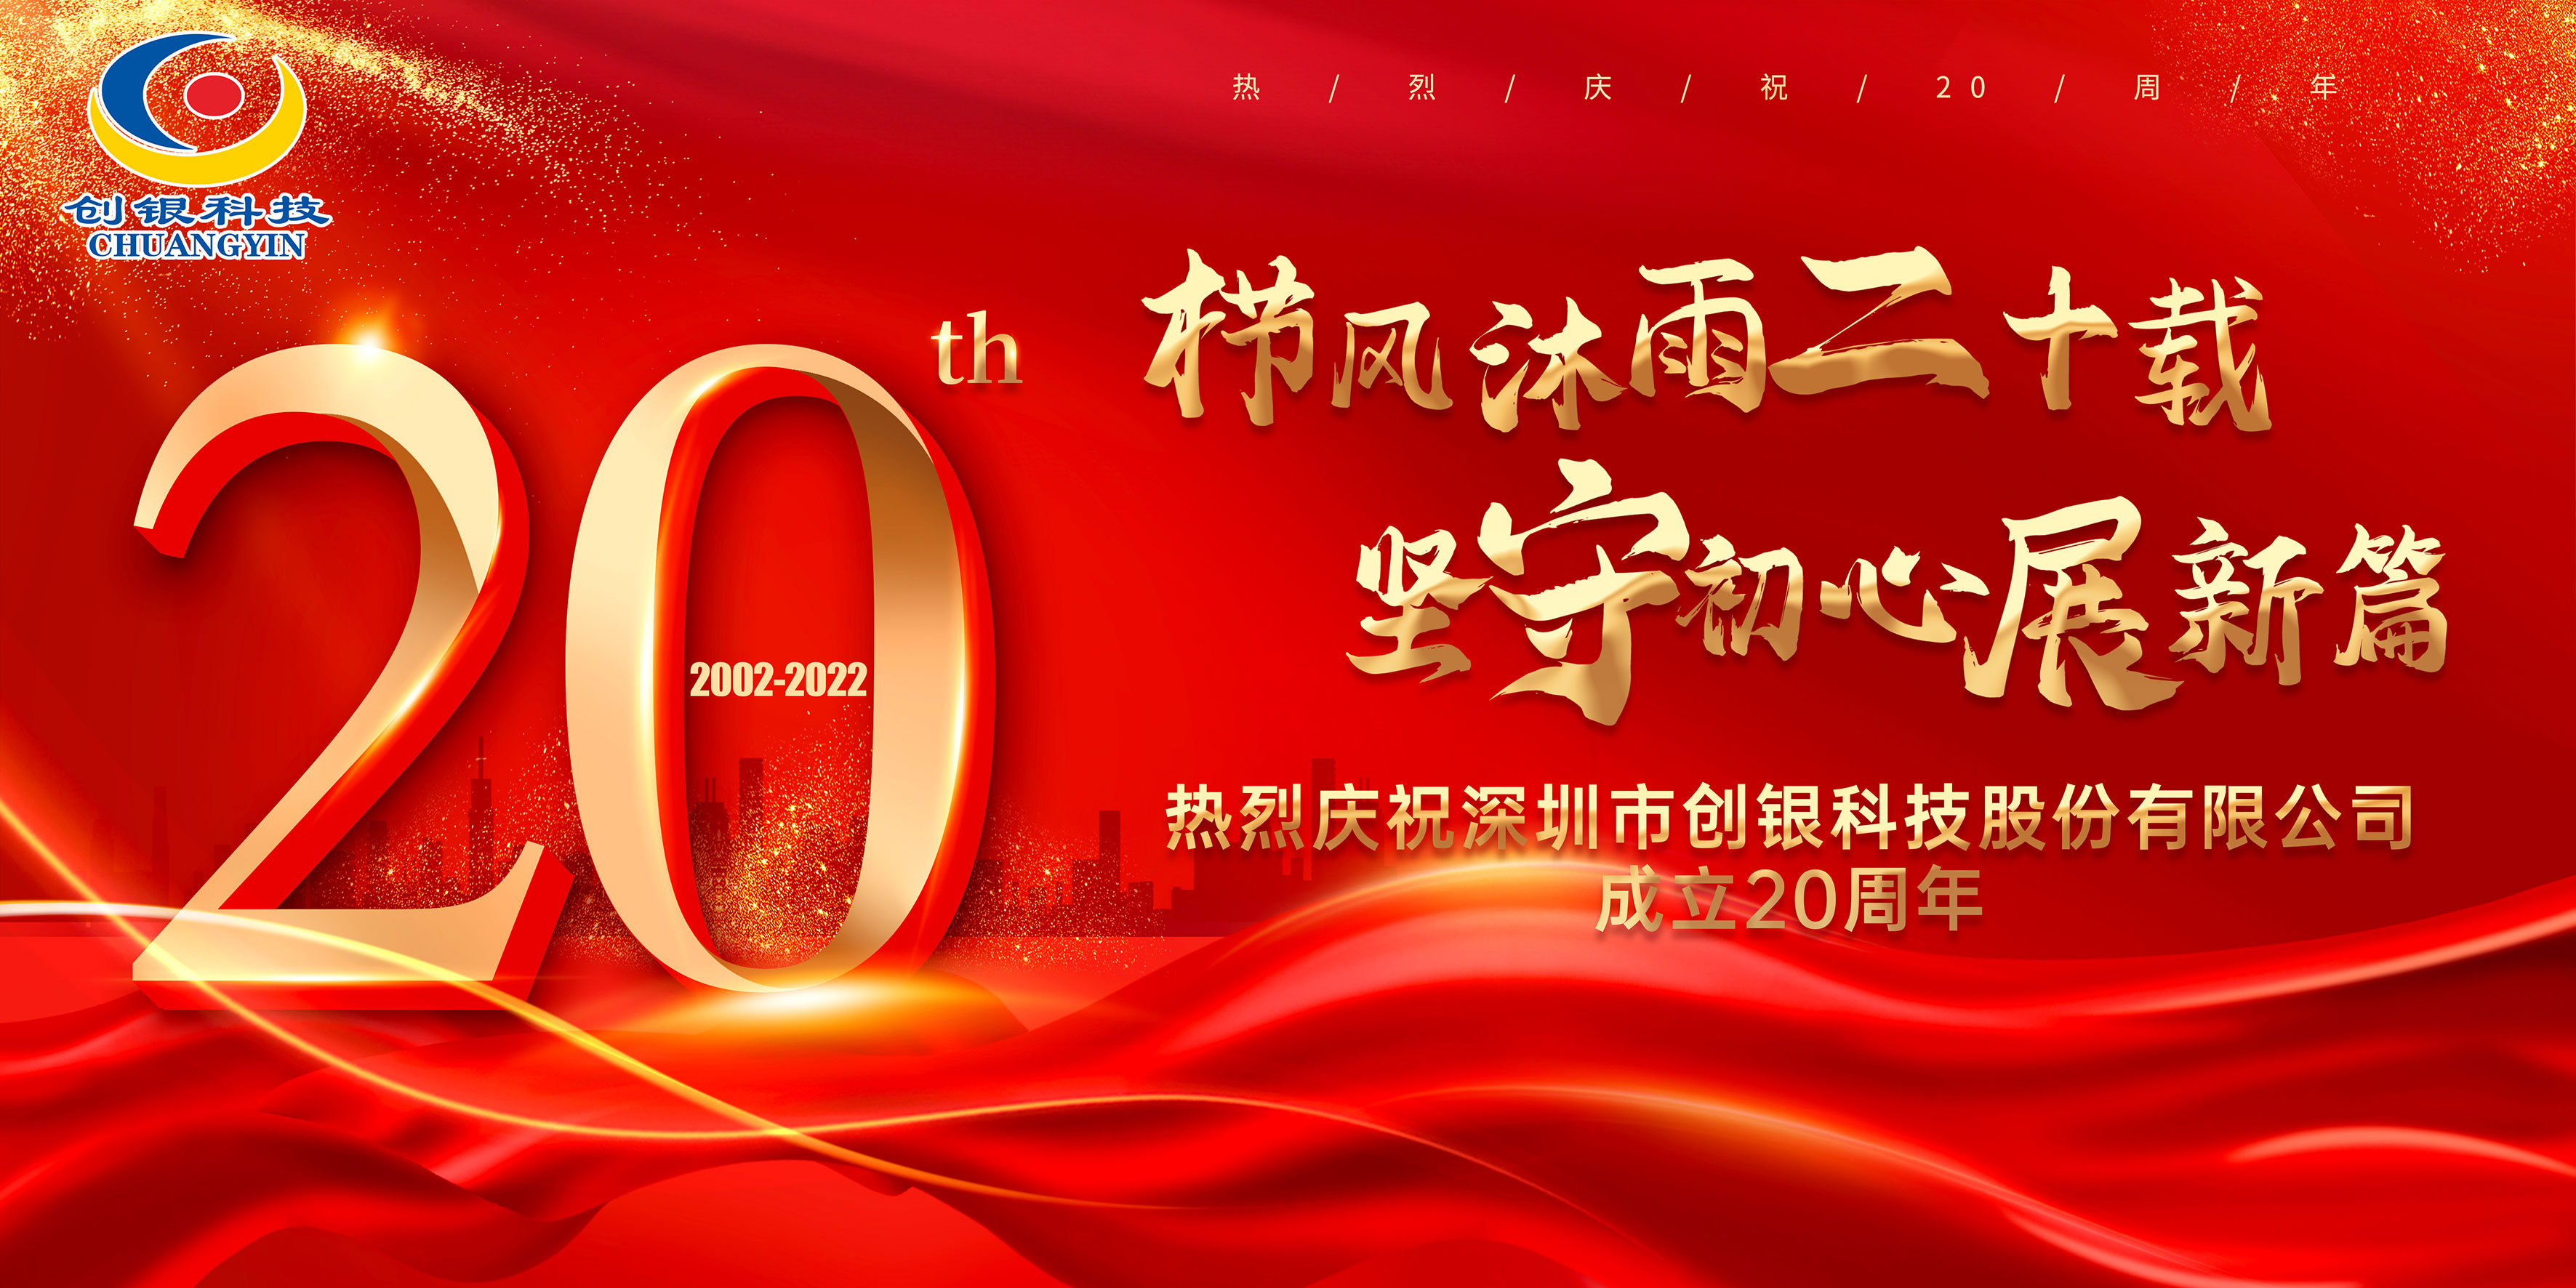 Chuangyin Technology | The 20th anniversary celebration was successfully held!